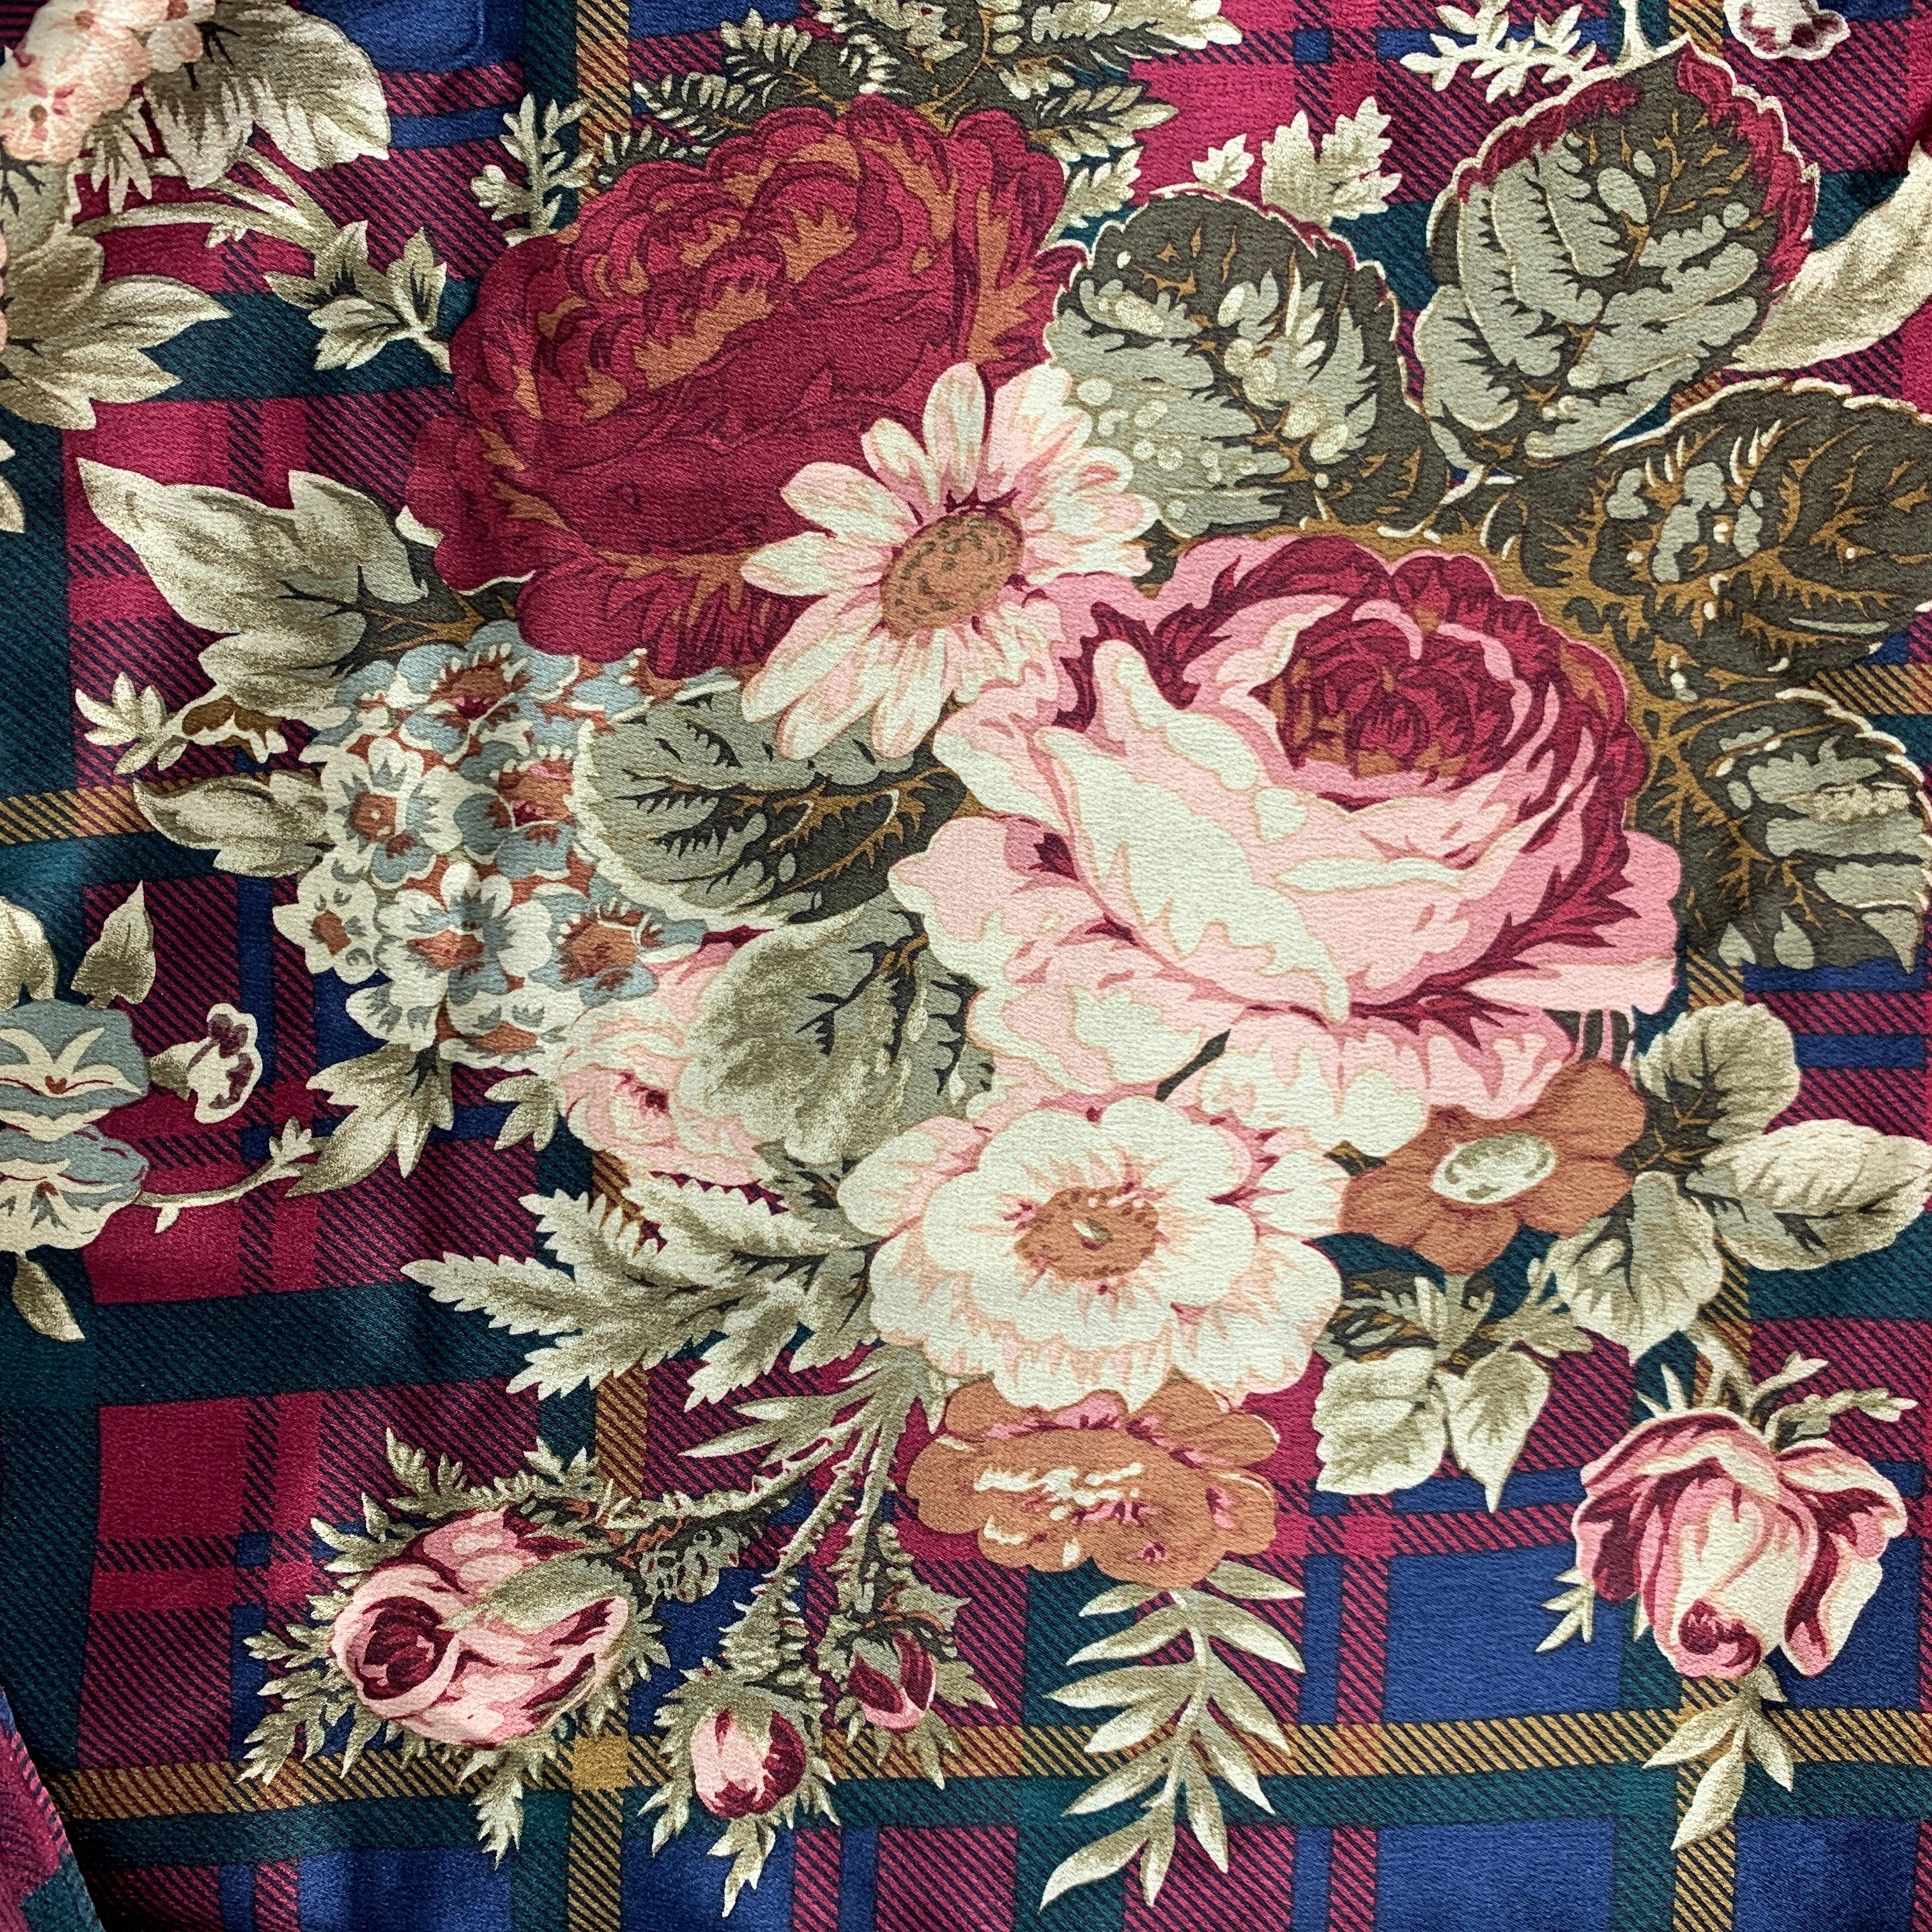 RALPH LAUREN Burgundy Multi Color Plaid Floral Scarf In Good Condition For Sale In San Francisco, CA